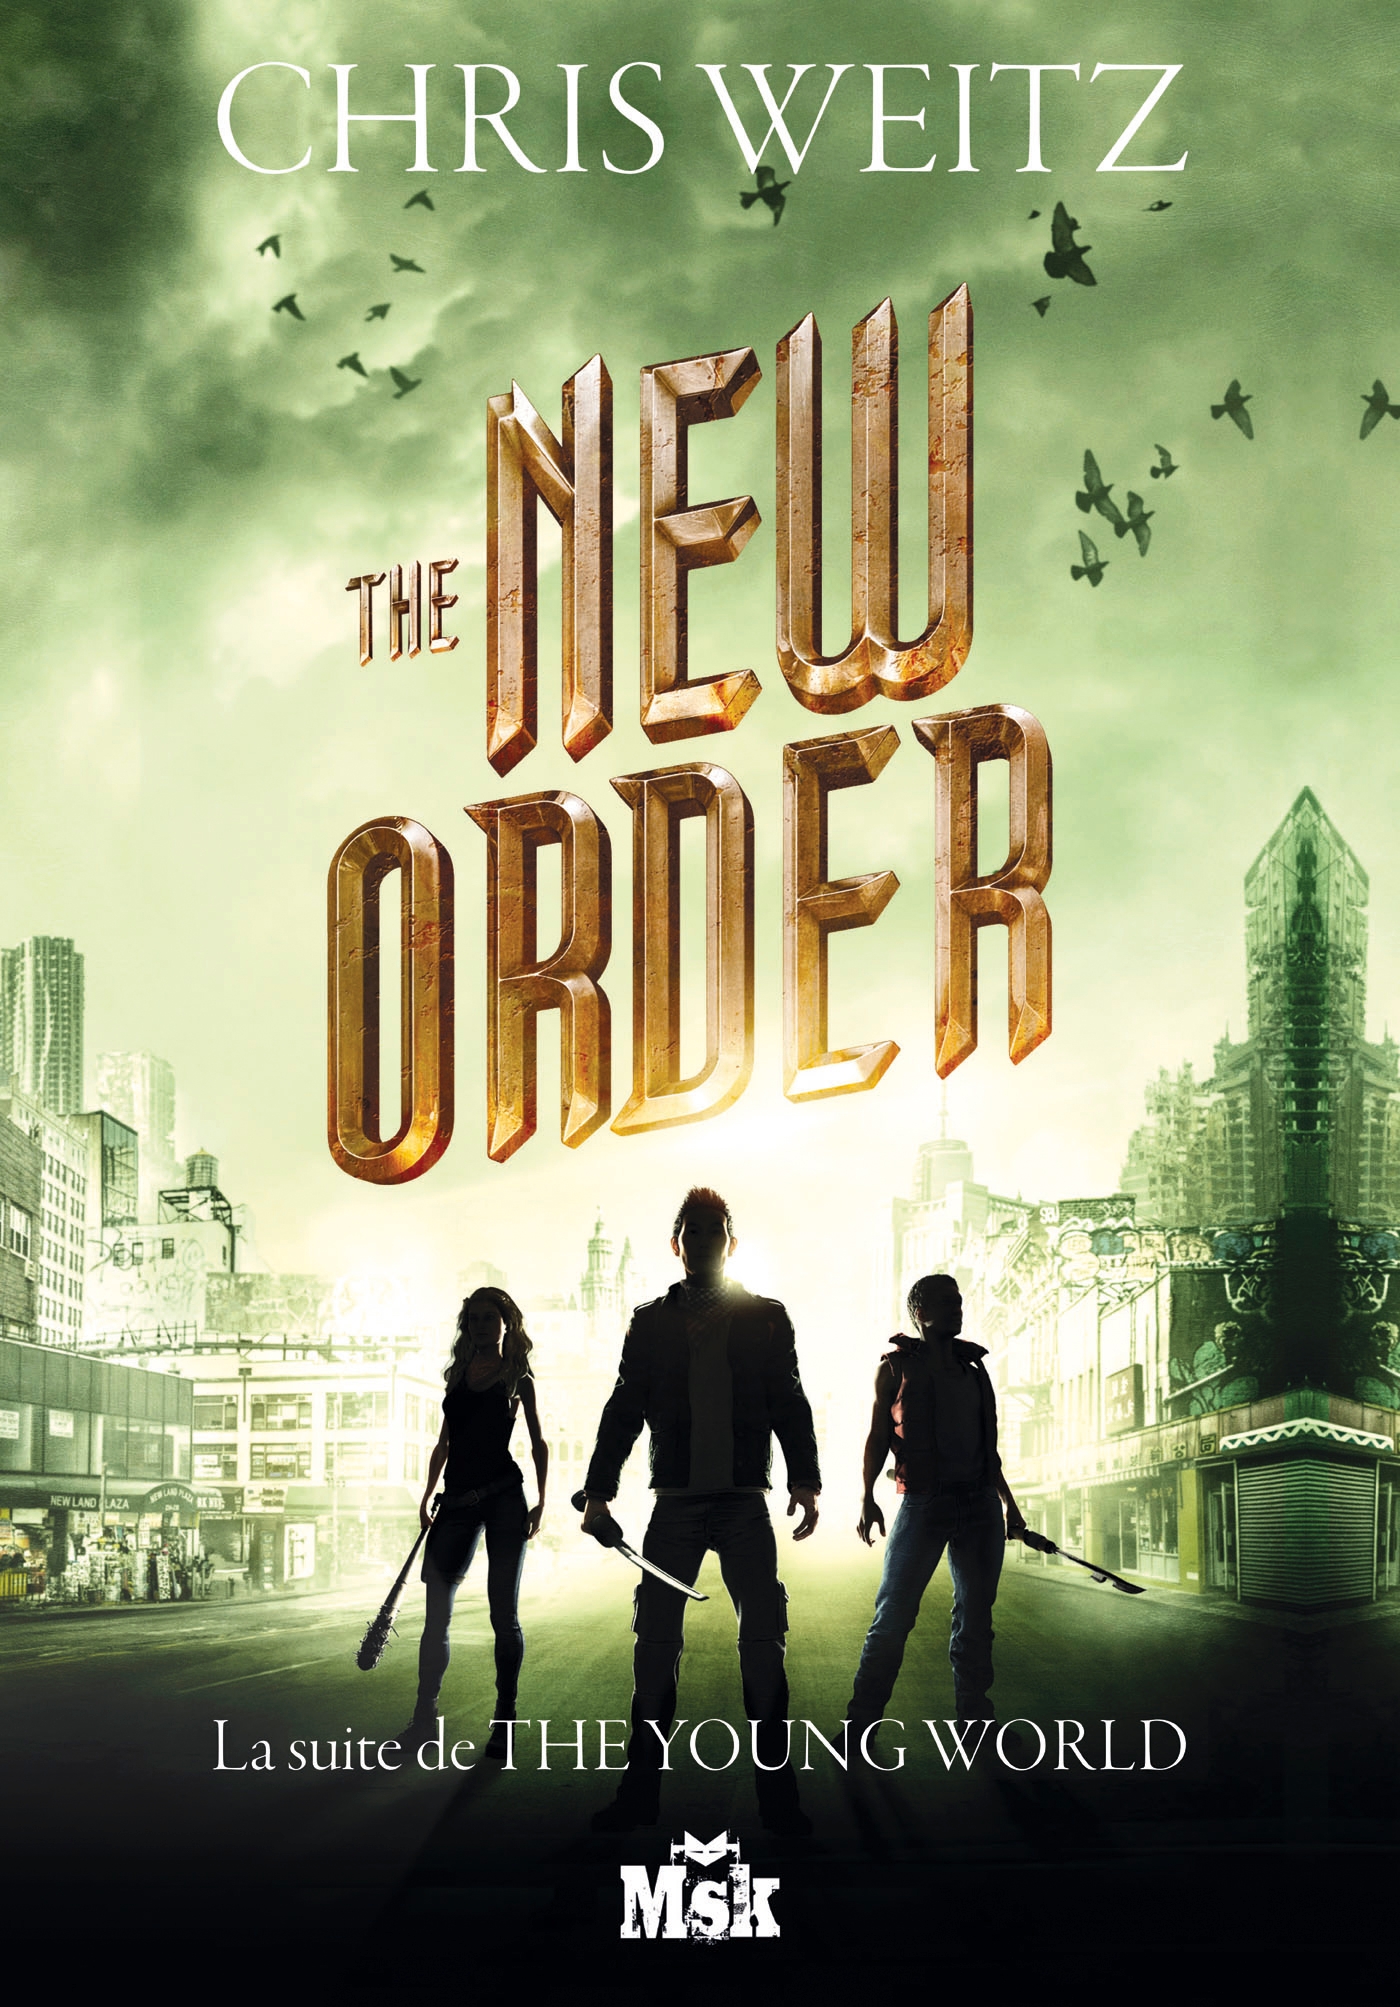 The New Order